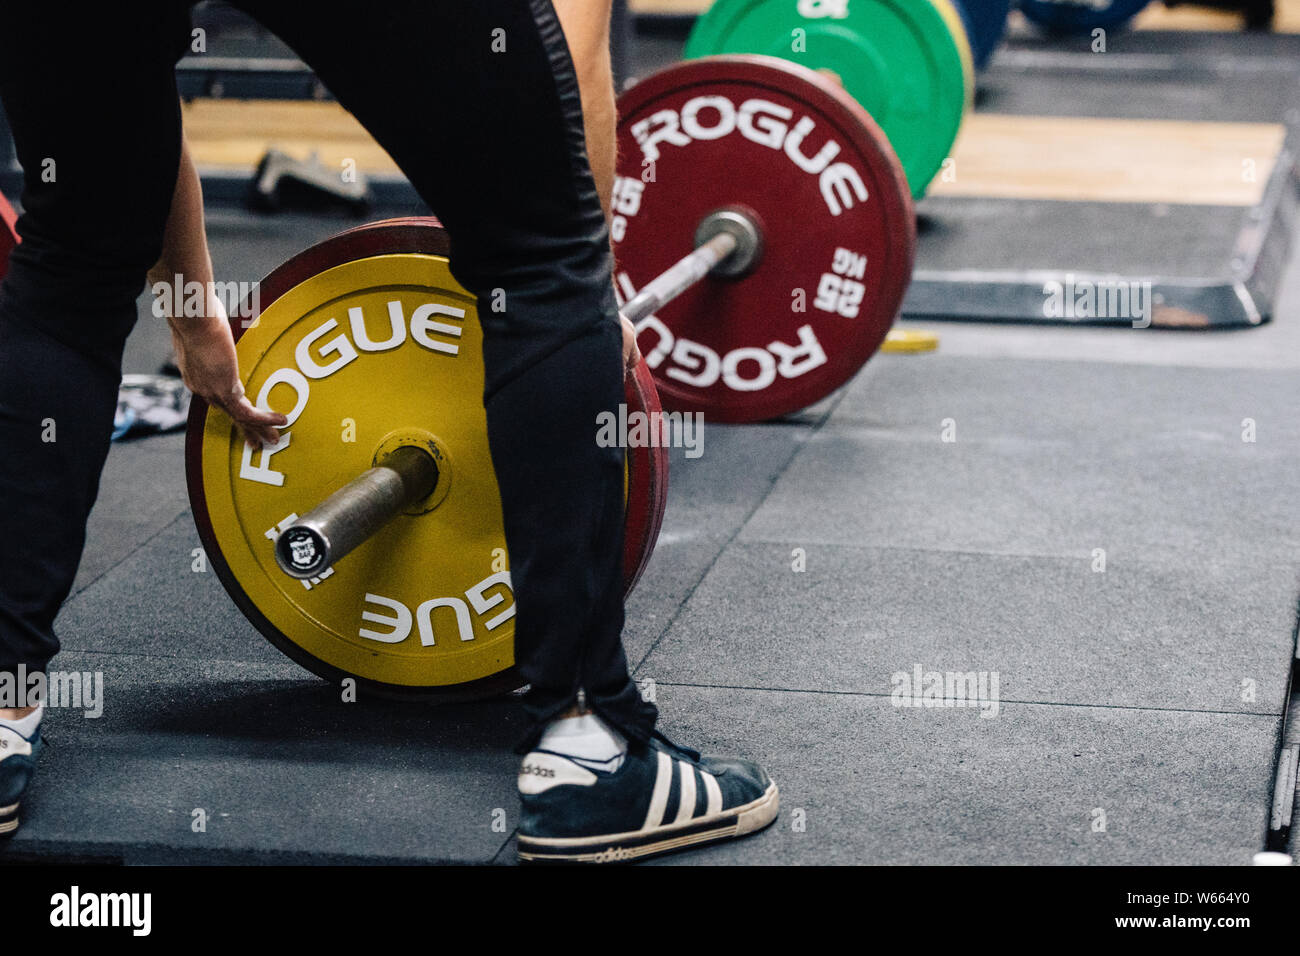 Male Competitor at the University of Leeds Powerlifting meet up at Implexus Gym. Stock Photo